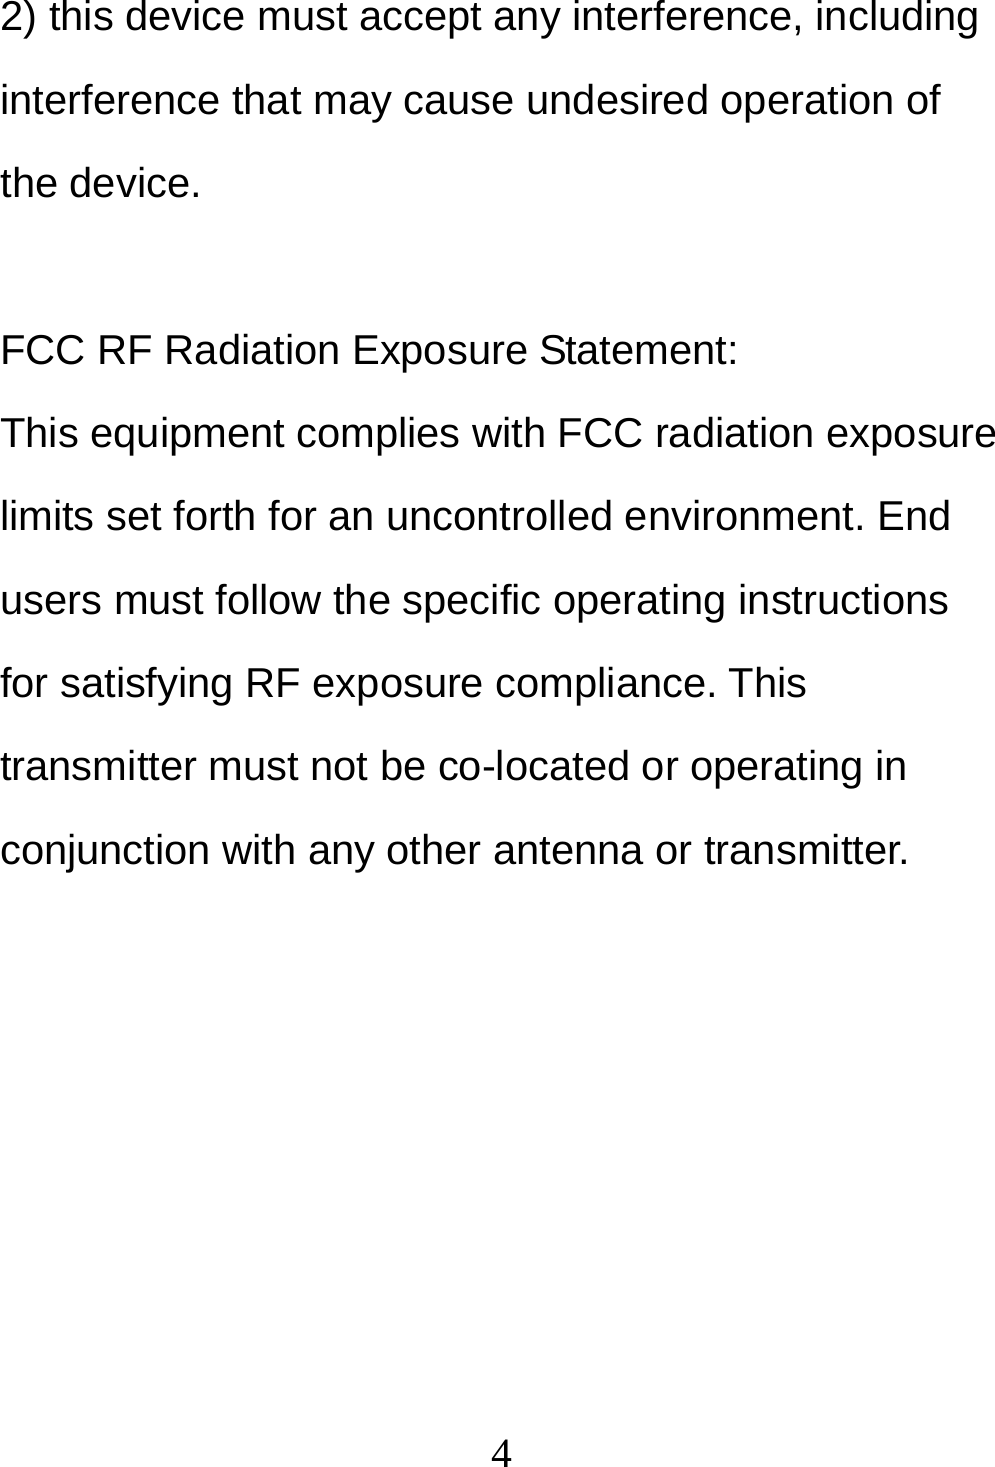  42) this device must accept any interference, including interference that may cause undesired operation of the device.  FCC RF Radiation Exposure Statement: This equipment complies with FCC radiation exposure limits set forth for an uncontrolled environment. End users must follow the specific operating instructions for satisfying RF exposure compliance. This transmitter must not be co-located or operating in conjunction with any other antenna or transmitter. 